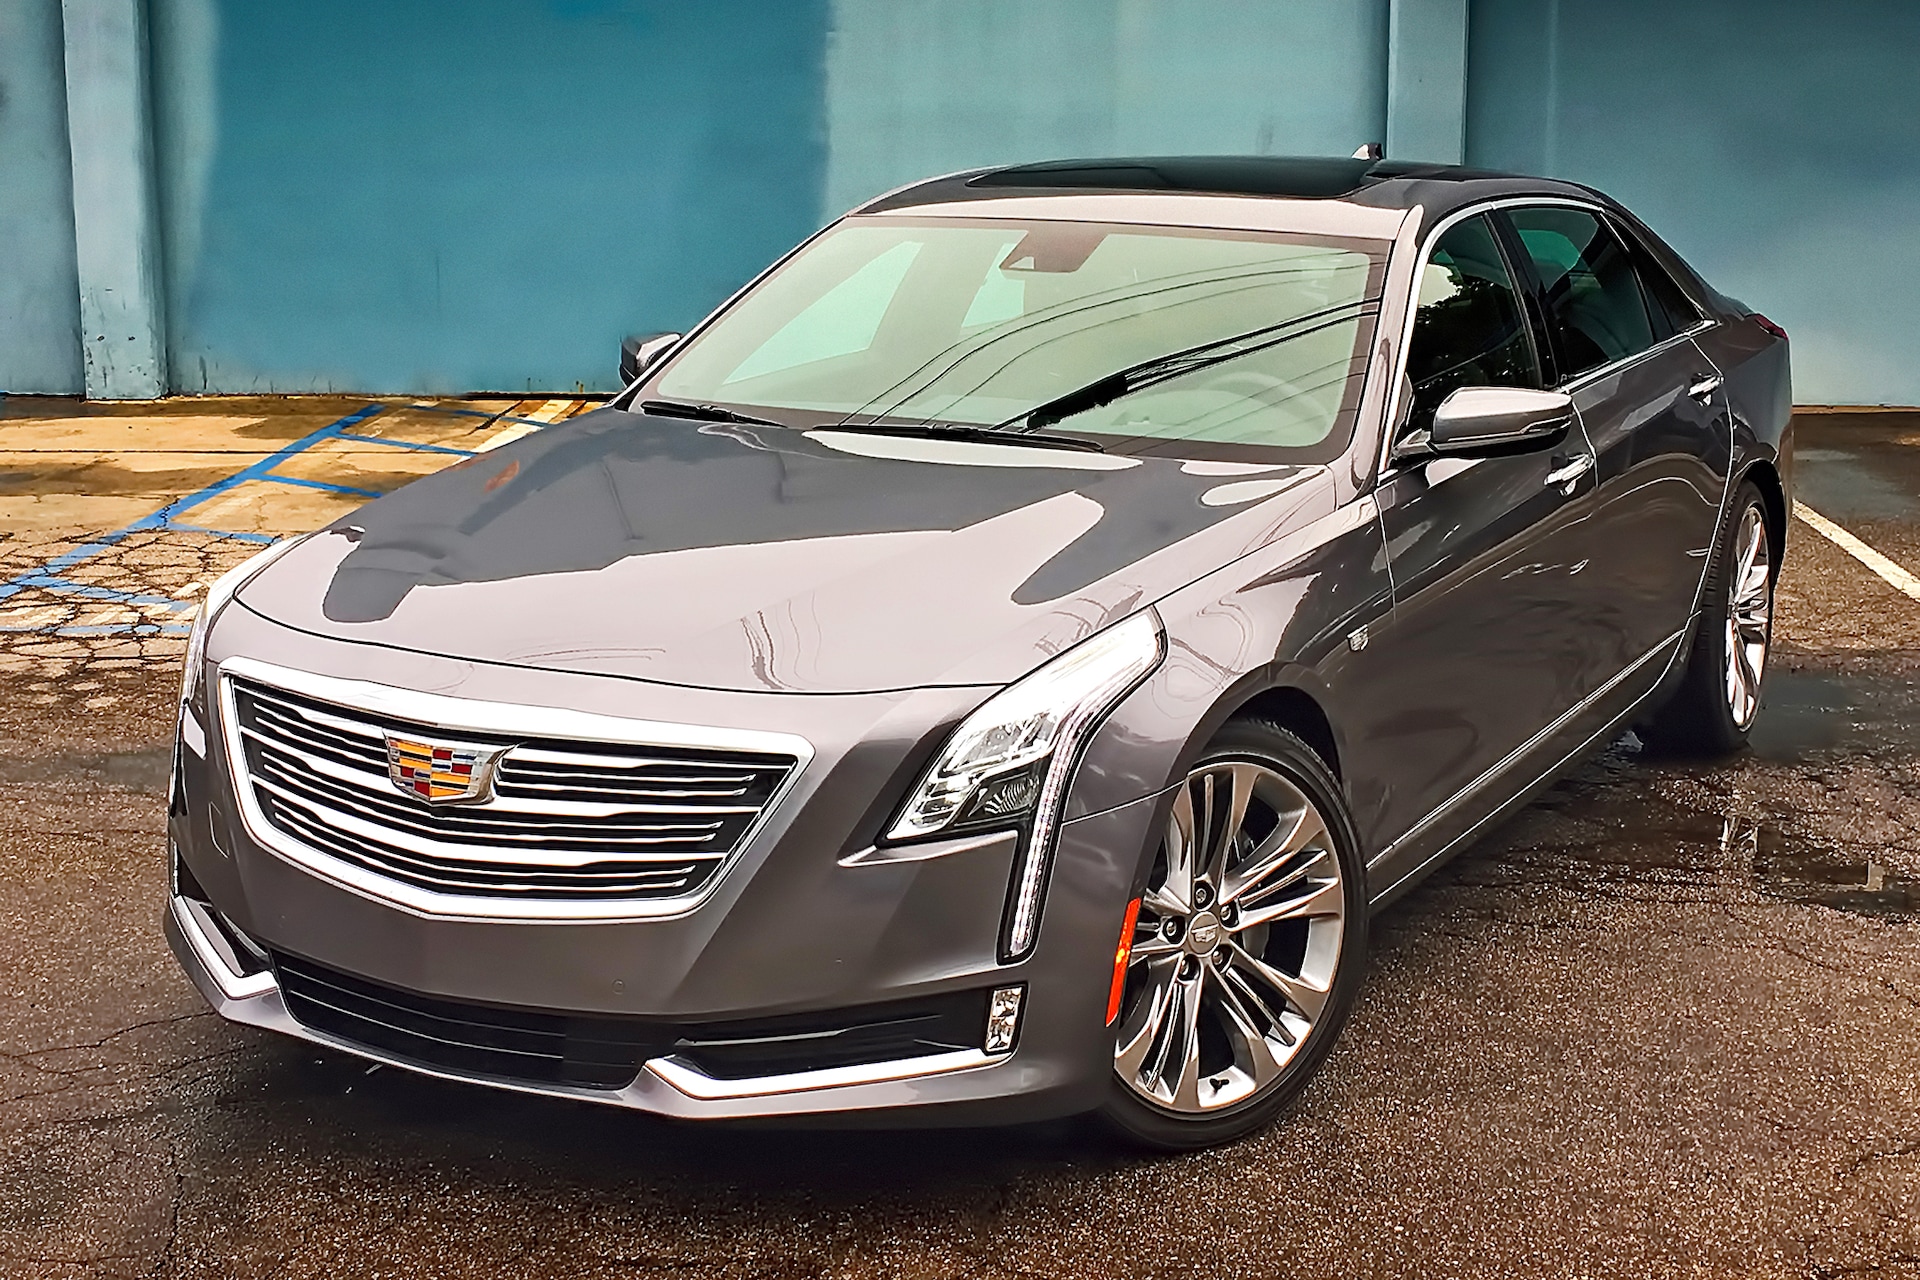 One Week With: 2018 Cadillac CT6 Platinum AWD